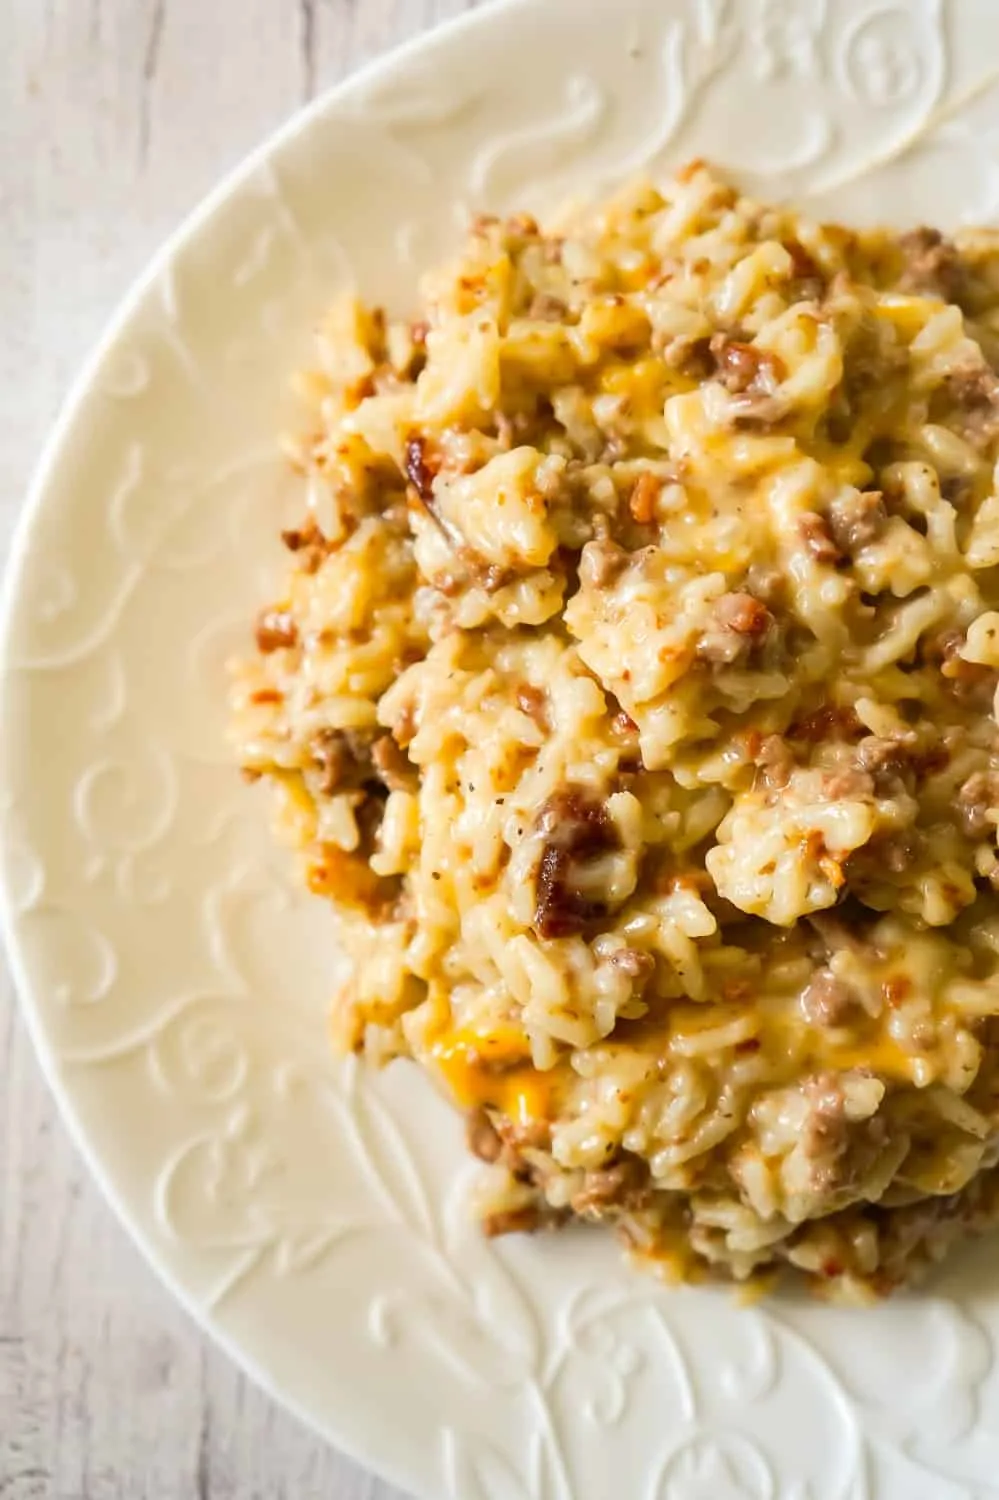 Instant Pot Bacon Cheeseburger Rice is a delicious pressure cooker dinner recipe using hamburger meat and loaded with long grain rice, crumbled bacon and cheese.